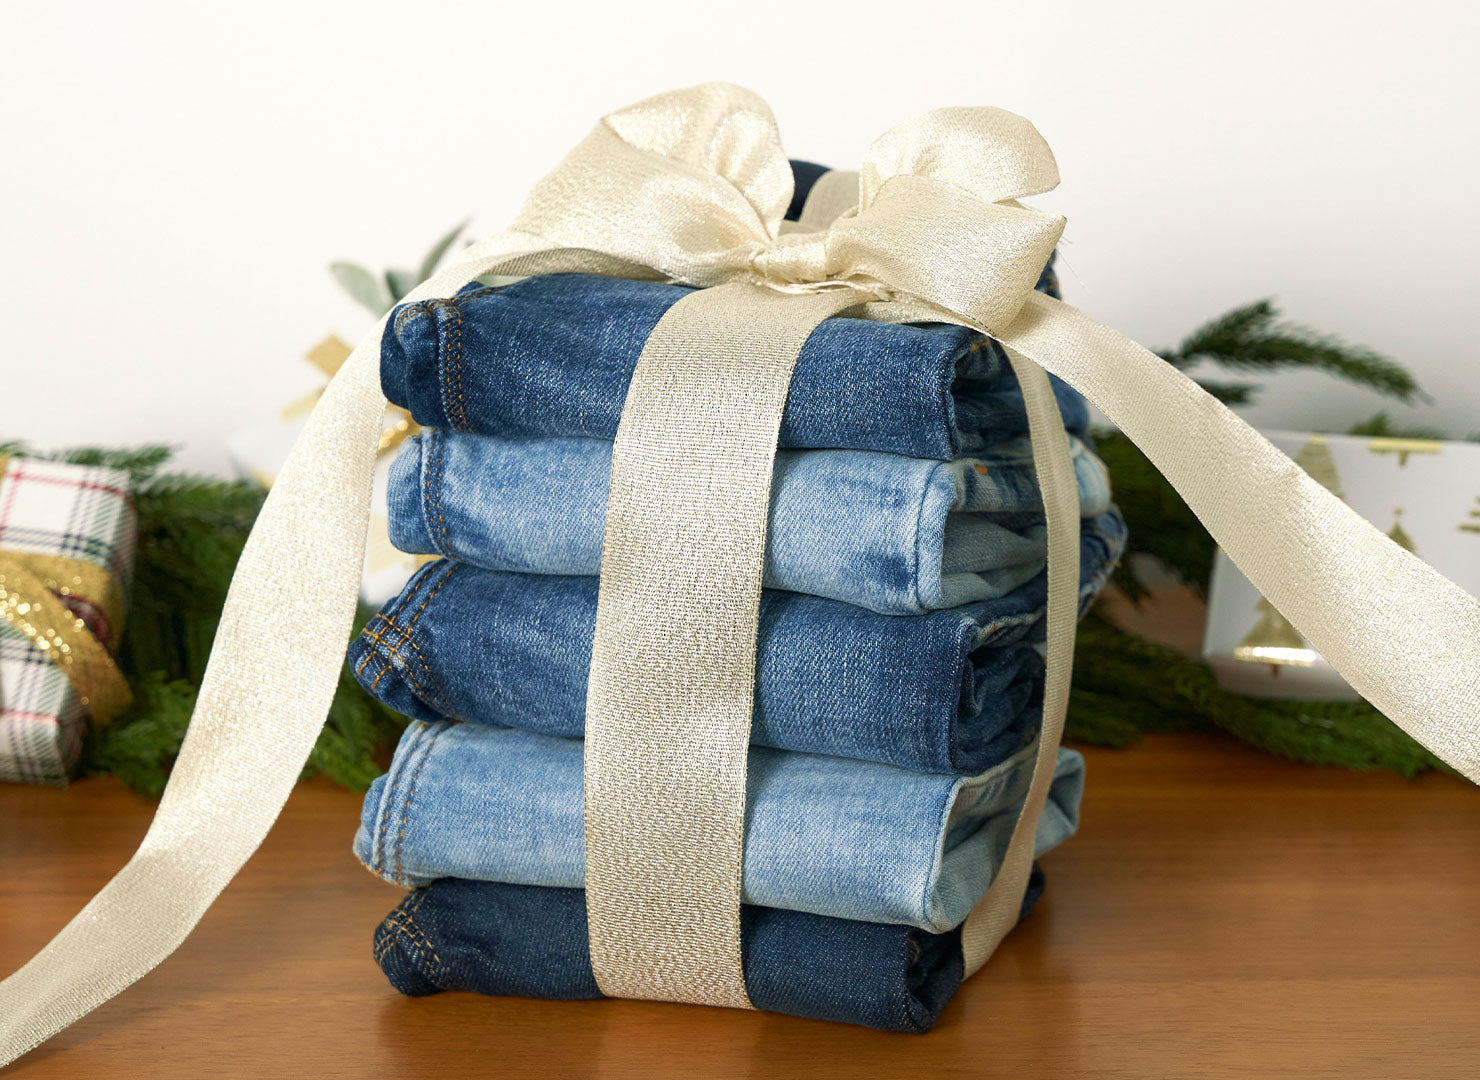 Christmas jeans in a stack ready for Santa